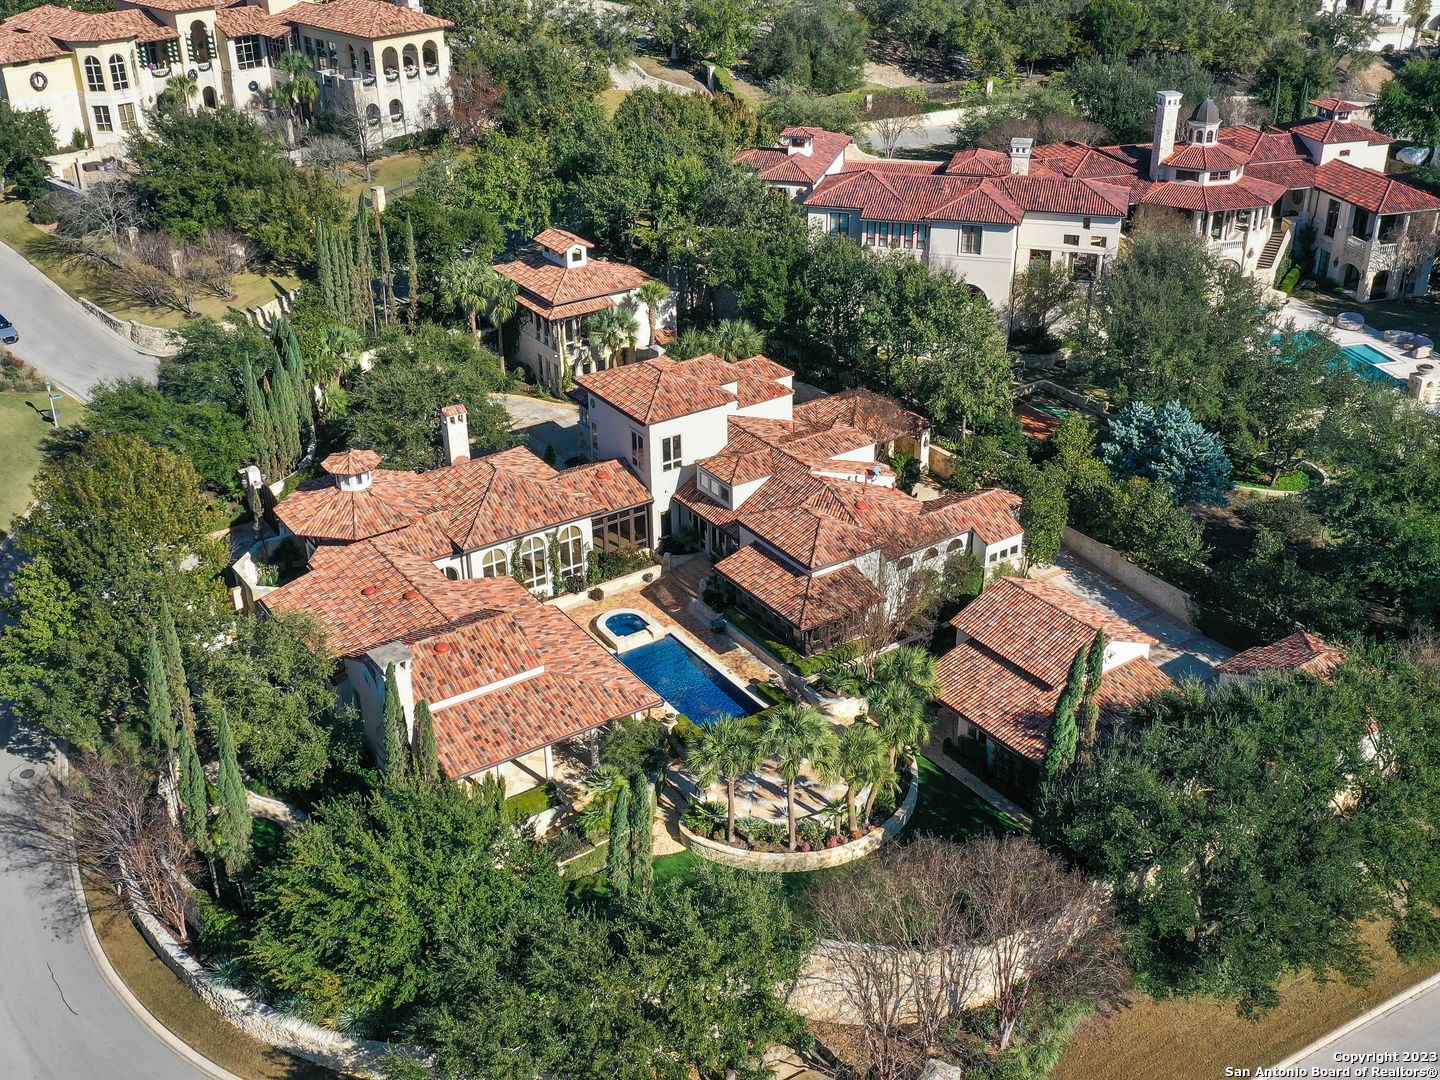 World-class grounds await hidden behind large wrought iron gates and lined with mature trees brought in to provide unrivaled levels of privacy from the road. Poised for large-scale entertaining, this palatial Mediterranean estate is nothing short of spectacular. Privately gated and secluded on a corner lot, enter through the oversized double wrought iron gate to an expansive flagstone and in-laid brick motor court with ample space for guest parking. A separate guest apartment with private access off of Crescent Park features the same level of luxurious detail to include a living room, bar, and full bath down and an oversized guest suite up with vaulted ceilings, a sitting area, and an en suite bath. Step inside and be greeted by walls of floor-to-ceiling windows allowing for natural lighting to flood the interior, affording ample opportunity to relish in the gem's extraordinary appointments. From the gourmet chef's kitchen with a large beveled bullnose eat-in granite island to the family room with hand carved Cantera fireplace, every aspect of this home is grand in scale and bold in design. Indulge in the resort-style outdoor paradise with extensive stone and brick decking and hardscaping surrounding the spectacular hand-laid mosaic glass tile pool and jacuzzi with three tiers of entertaining space. Recently re-stucco of exterior throughout and refinishing of wood floors throughout. An unrivaled opportunity to enjoy an unparalleled lifestyle of seclusion, luxurious comfort, and lavish entertaining within the coveted guarded gates of The Dominion.